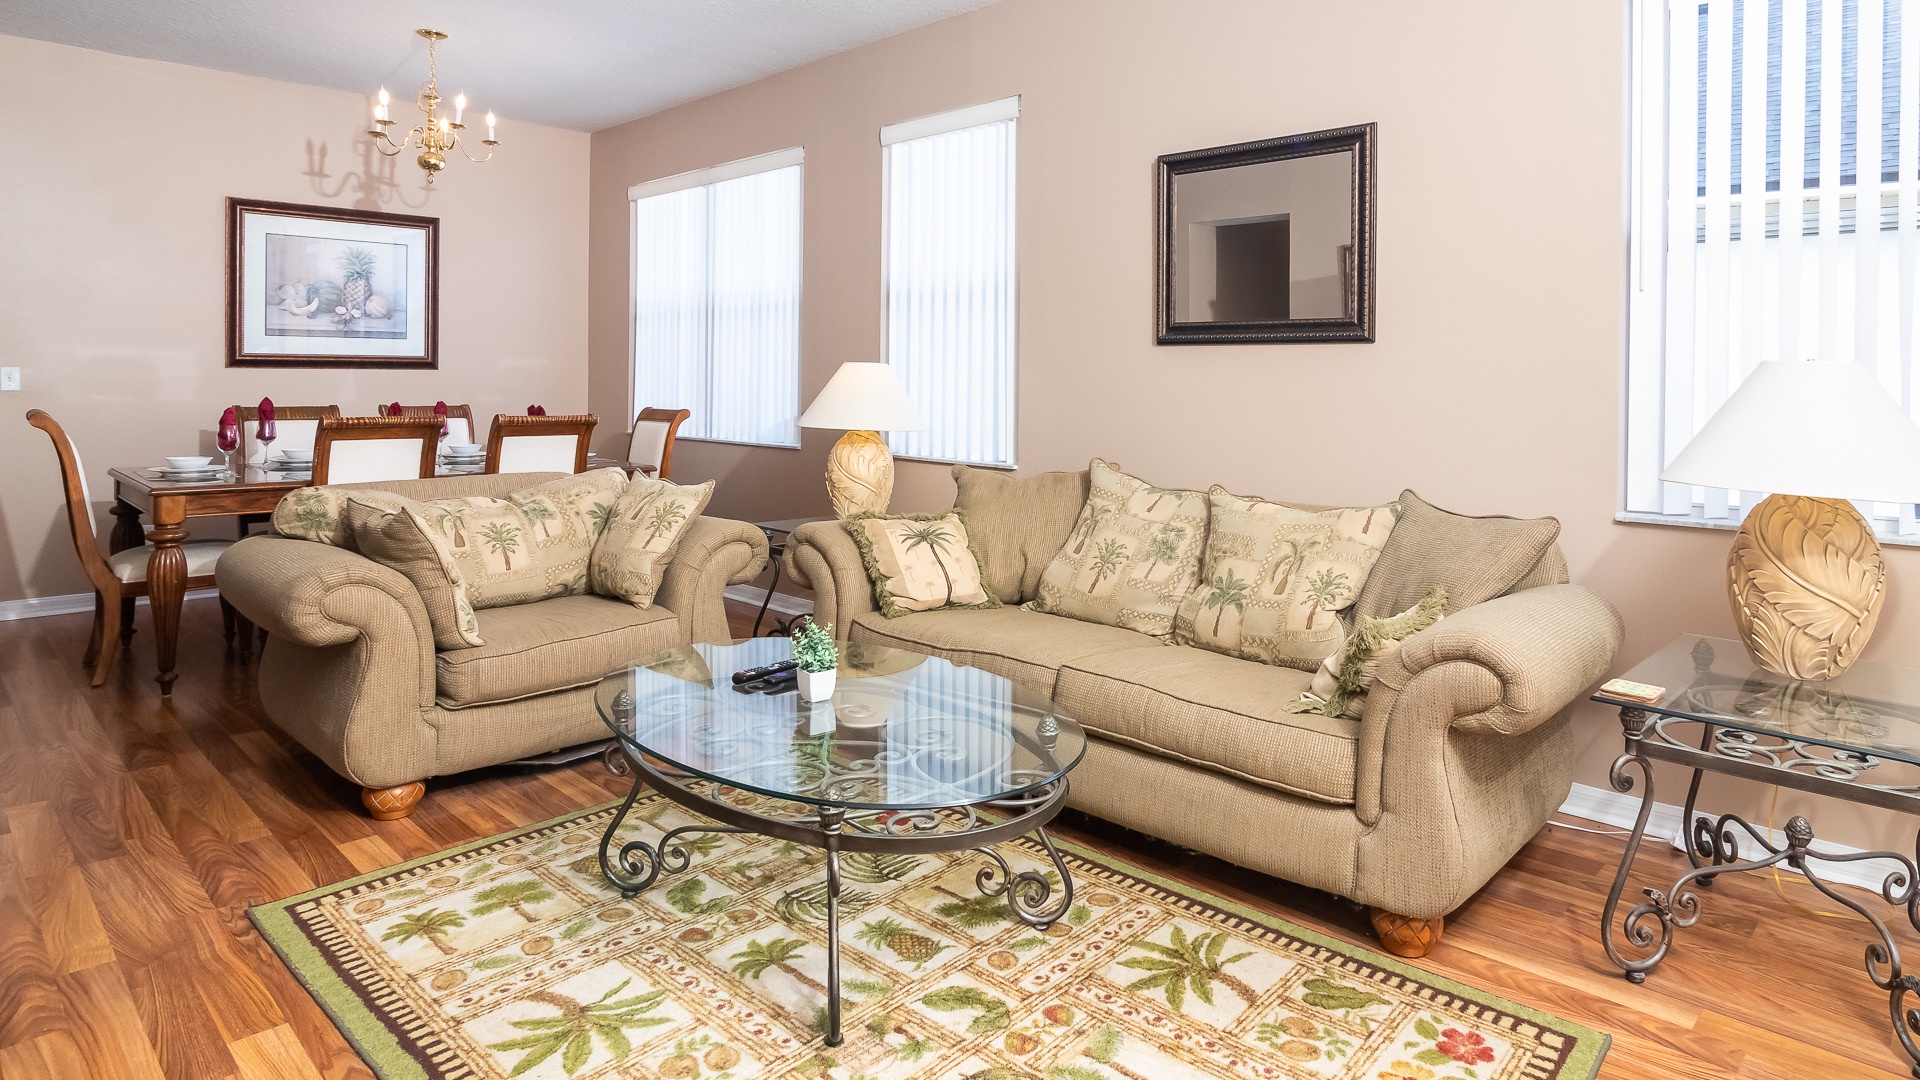 Ample seating for family and friends in the living area